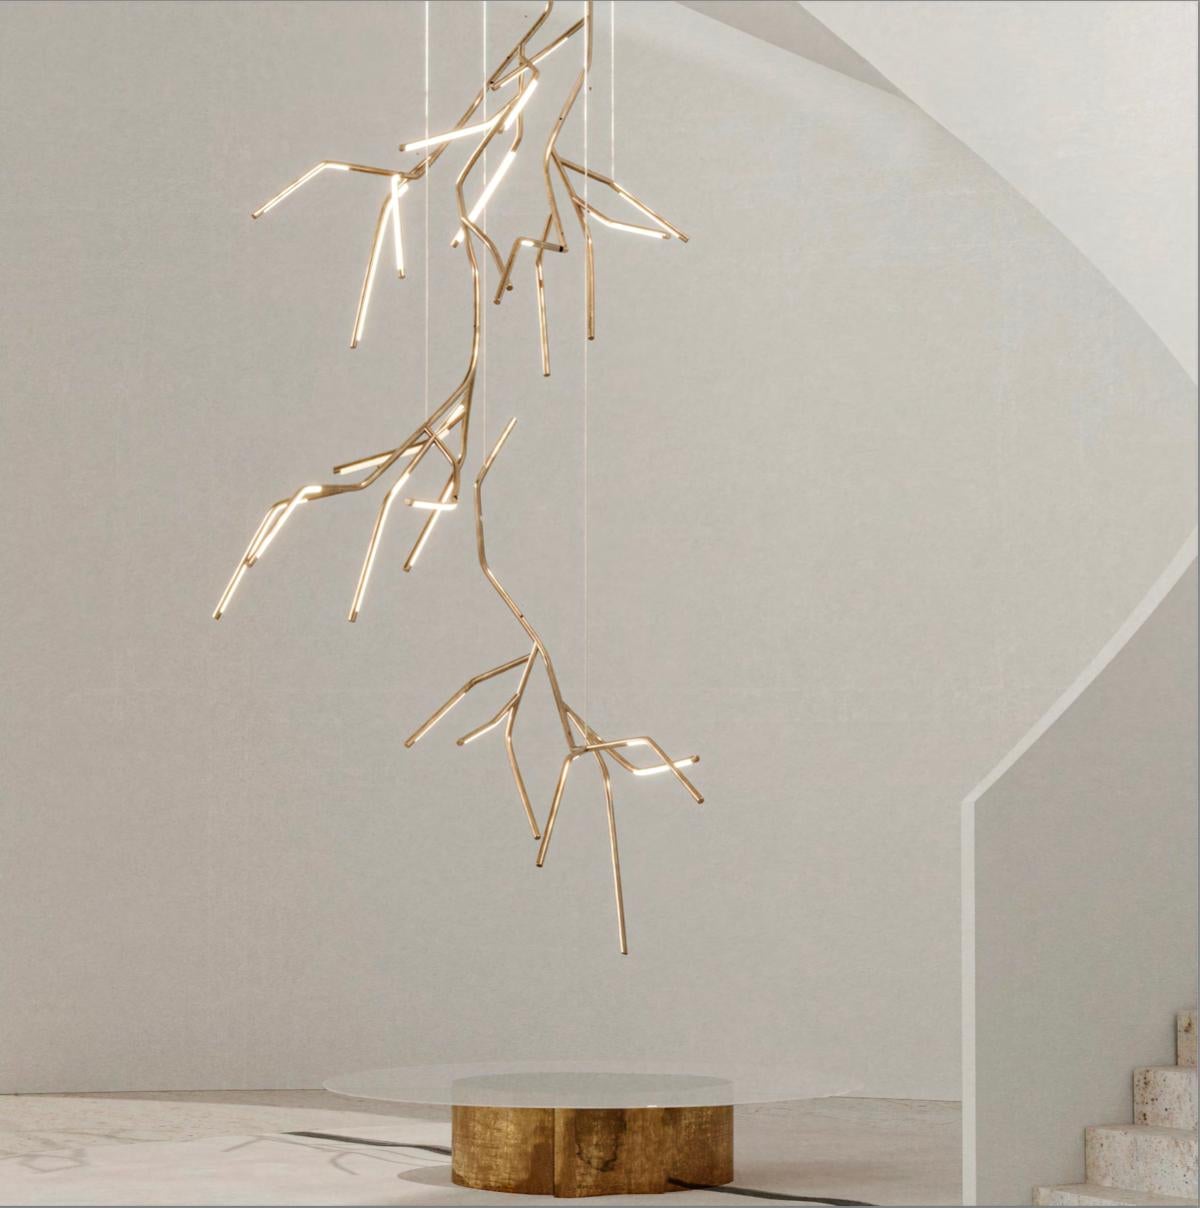 Dafne pendant light sculpted large by Morghen Studio
Materials: Grinded brass, LED Light, silicone
Dimensions: 120 x 120 x 400 cm

Made to order dimensions are possible.
We can customize all its details and give a complete service of 3D